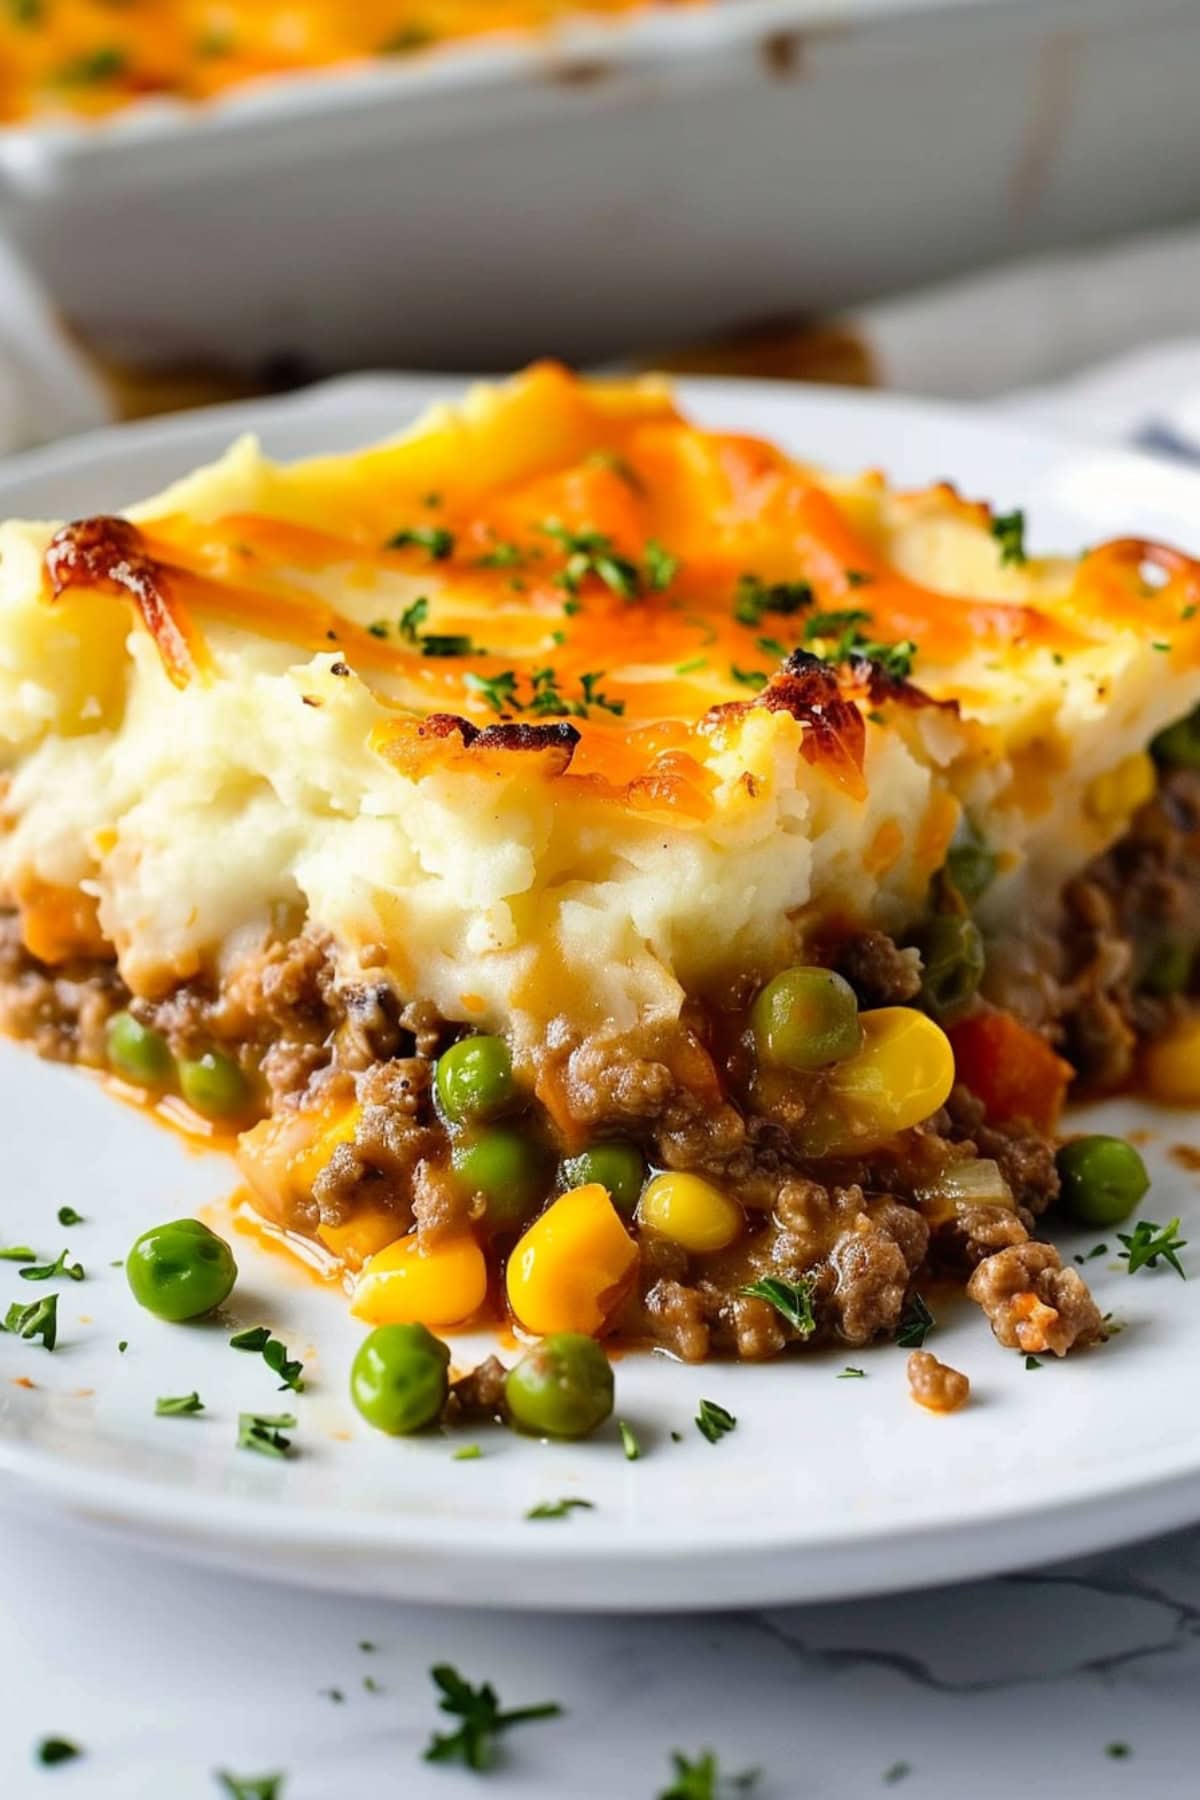 Mashed potatoes on top of ground lamb with corn kernels and green peas.